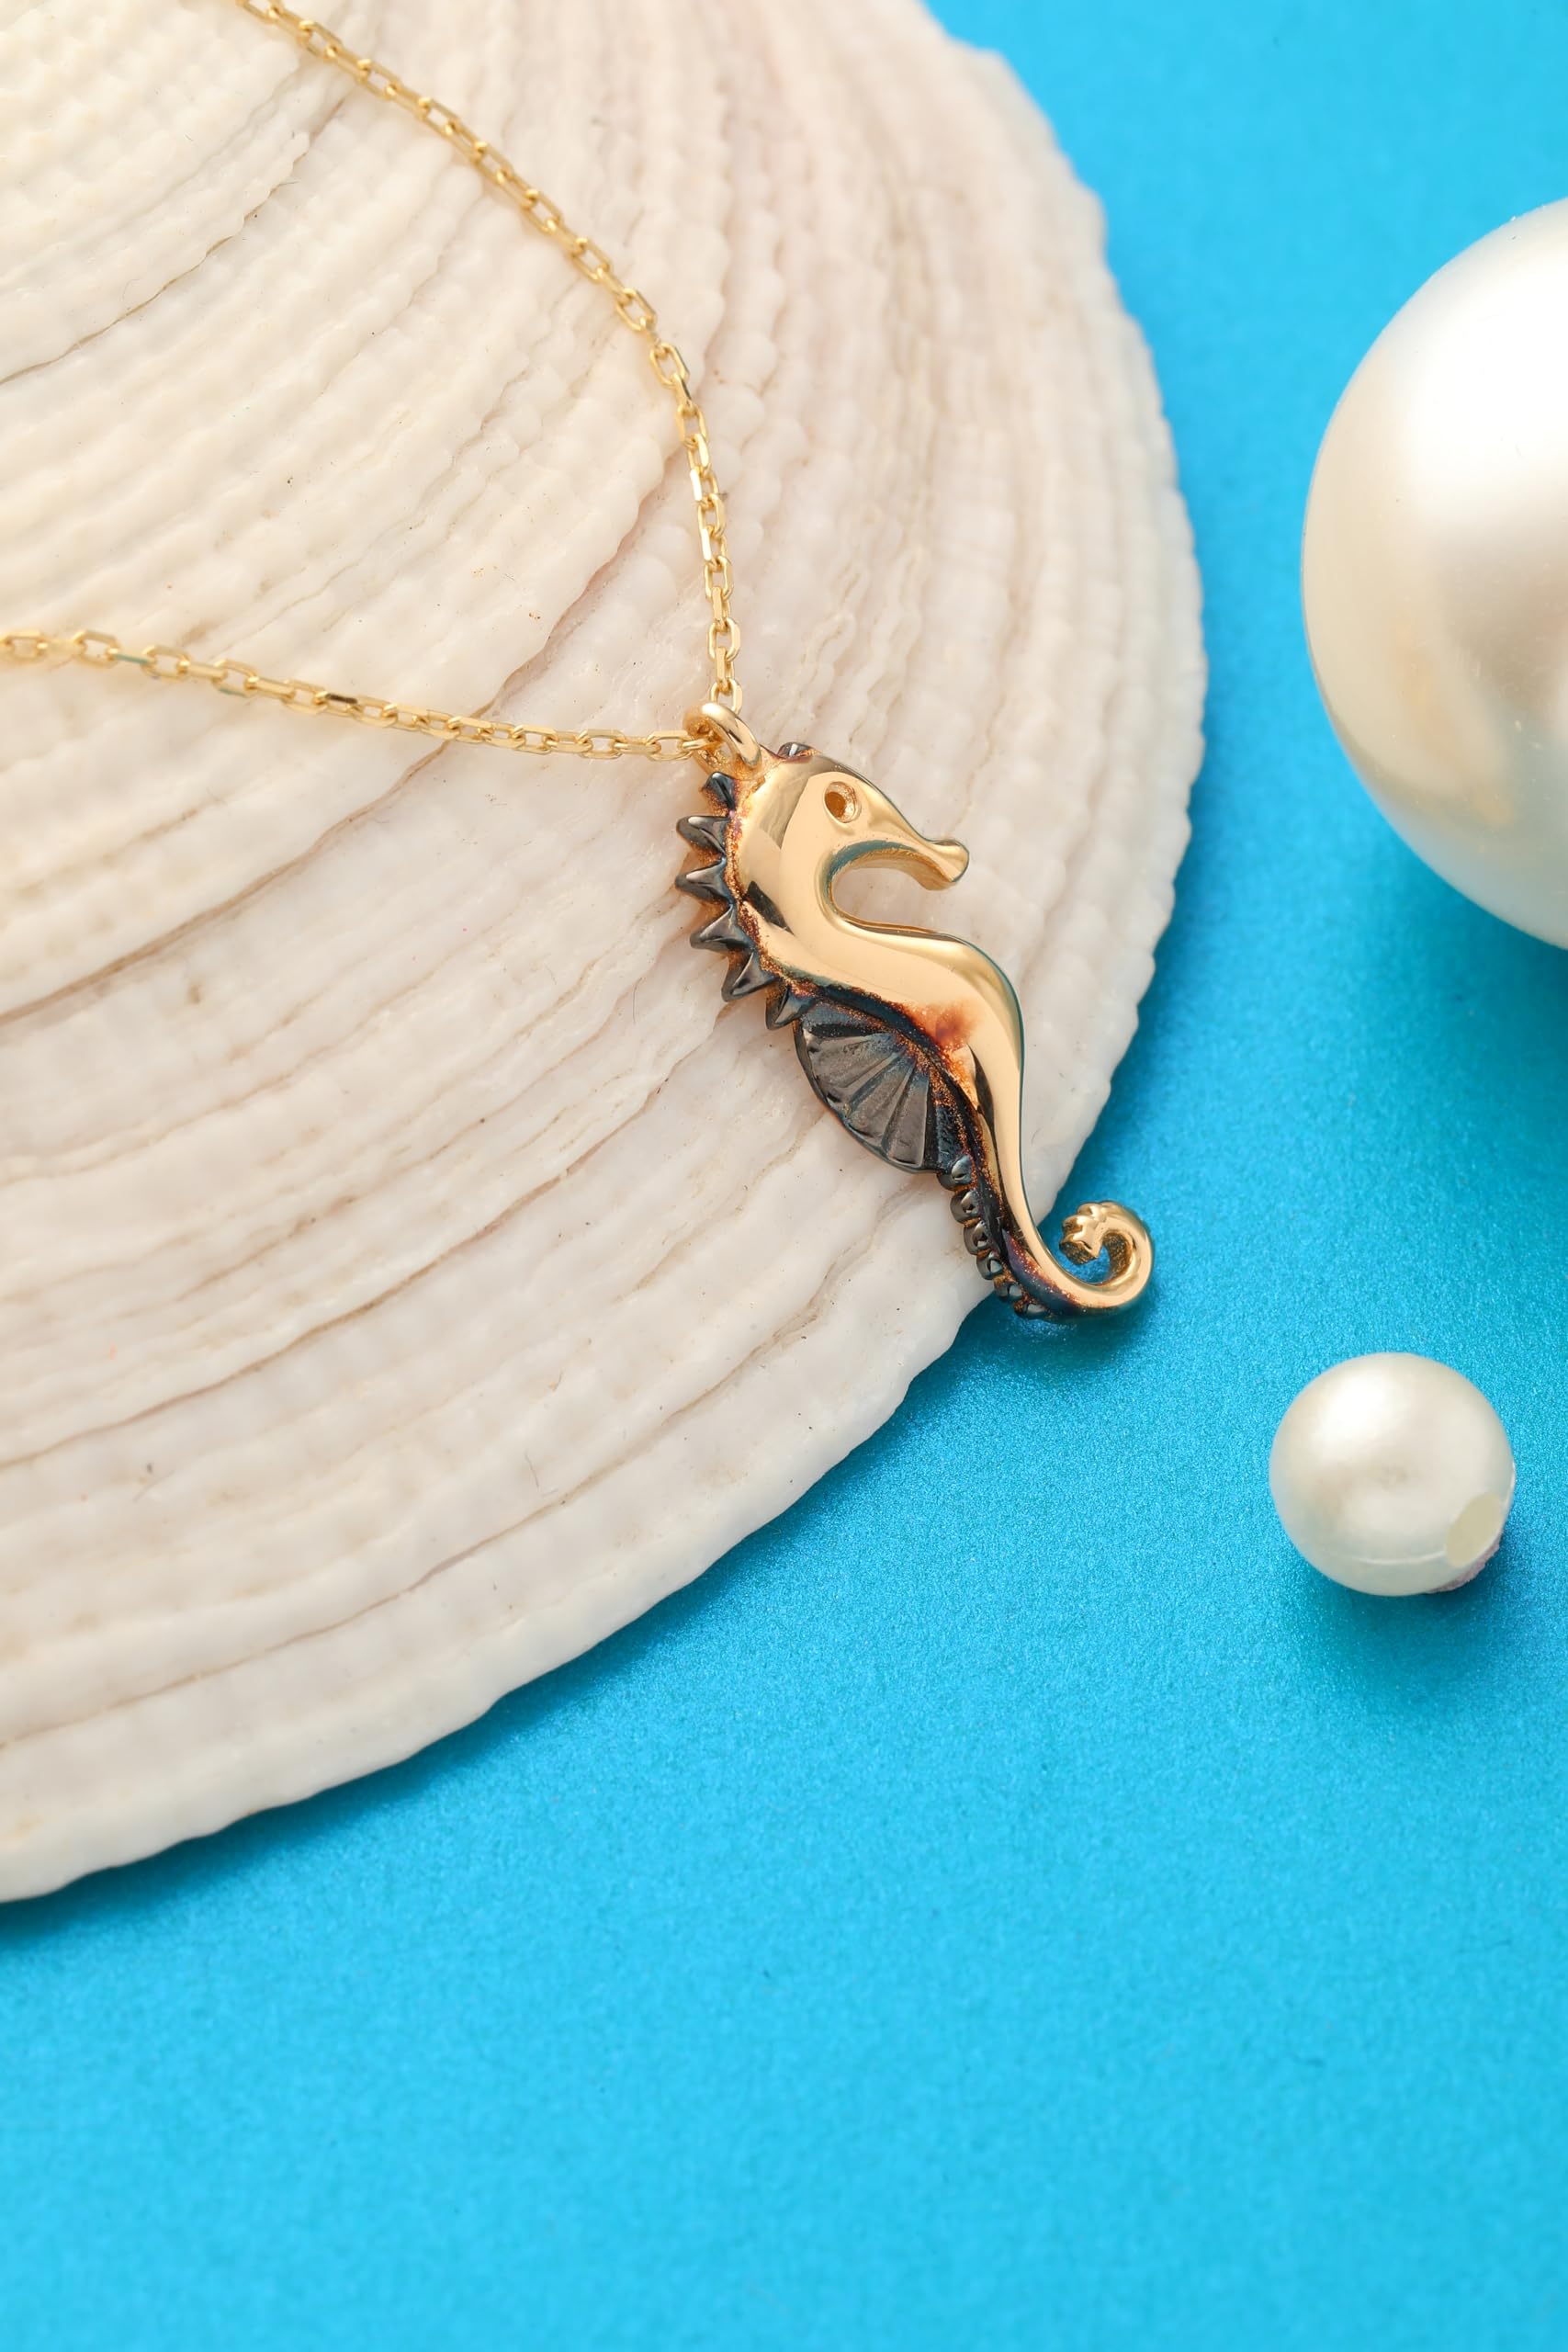 kk goldjewelry 14K Real Gold Seahorse Pendant, Dainty initial Animal Necklace, Minimalist Gold Seahorse Necklace, Birthday Gift